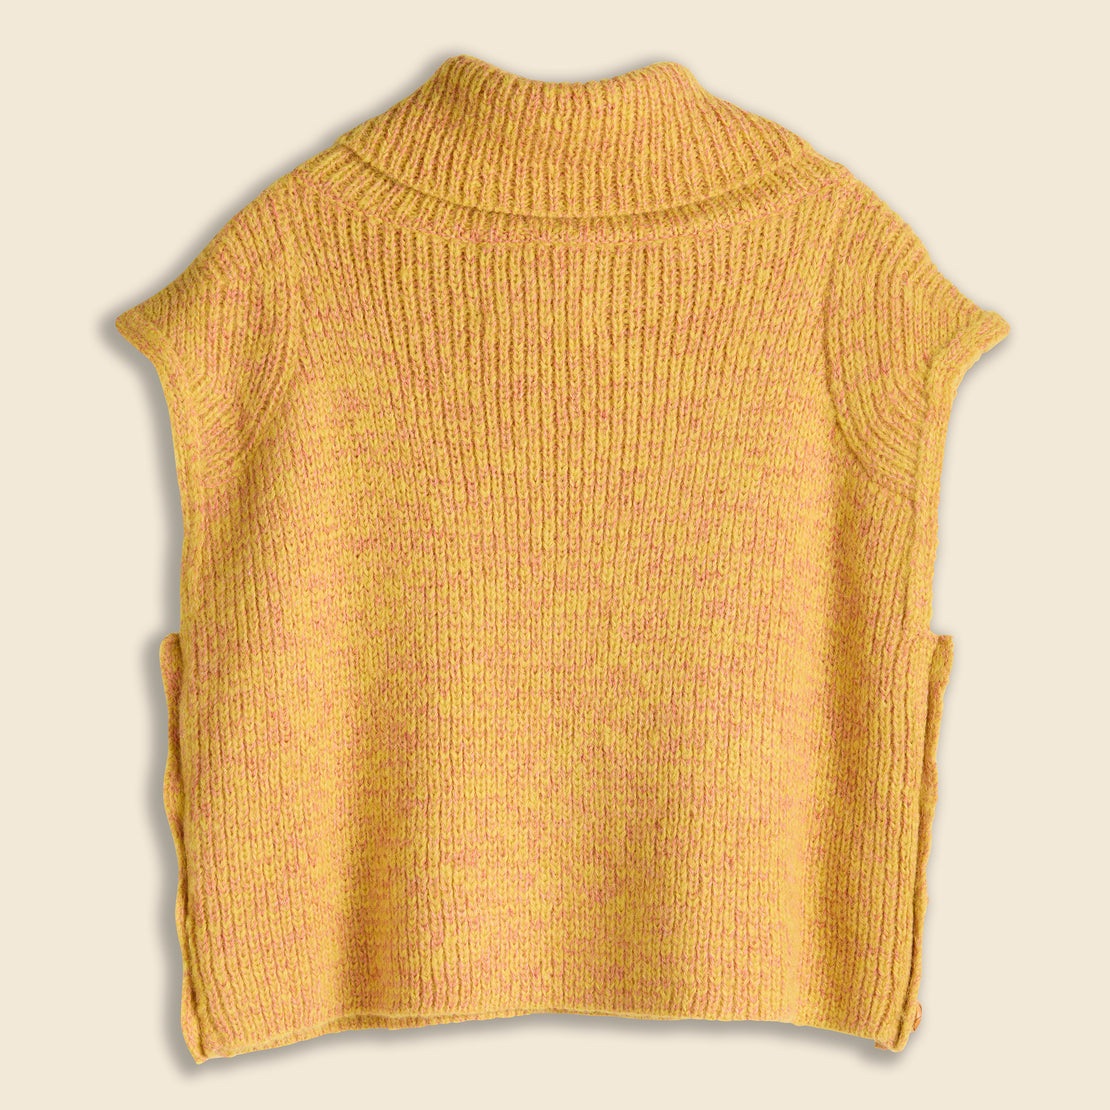 Wrenley Top - Peach - Atelier Delphine - STAG Provisions - W - Tops - Sweater